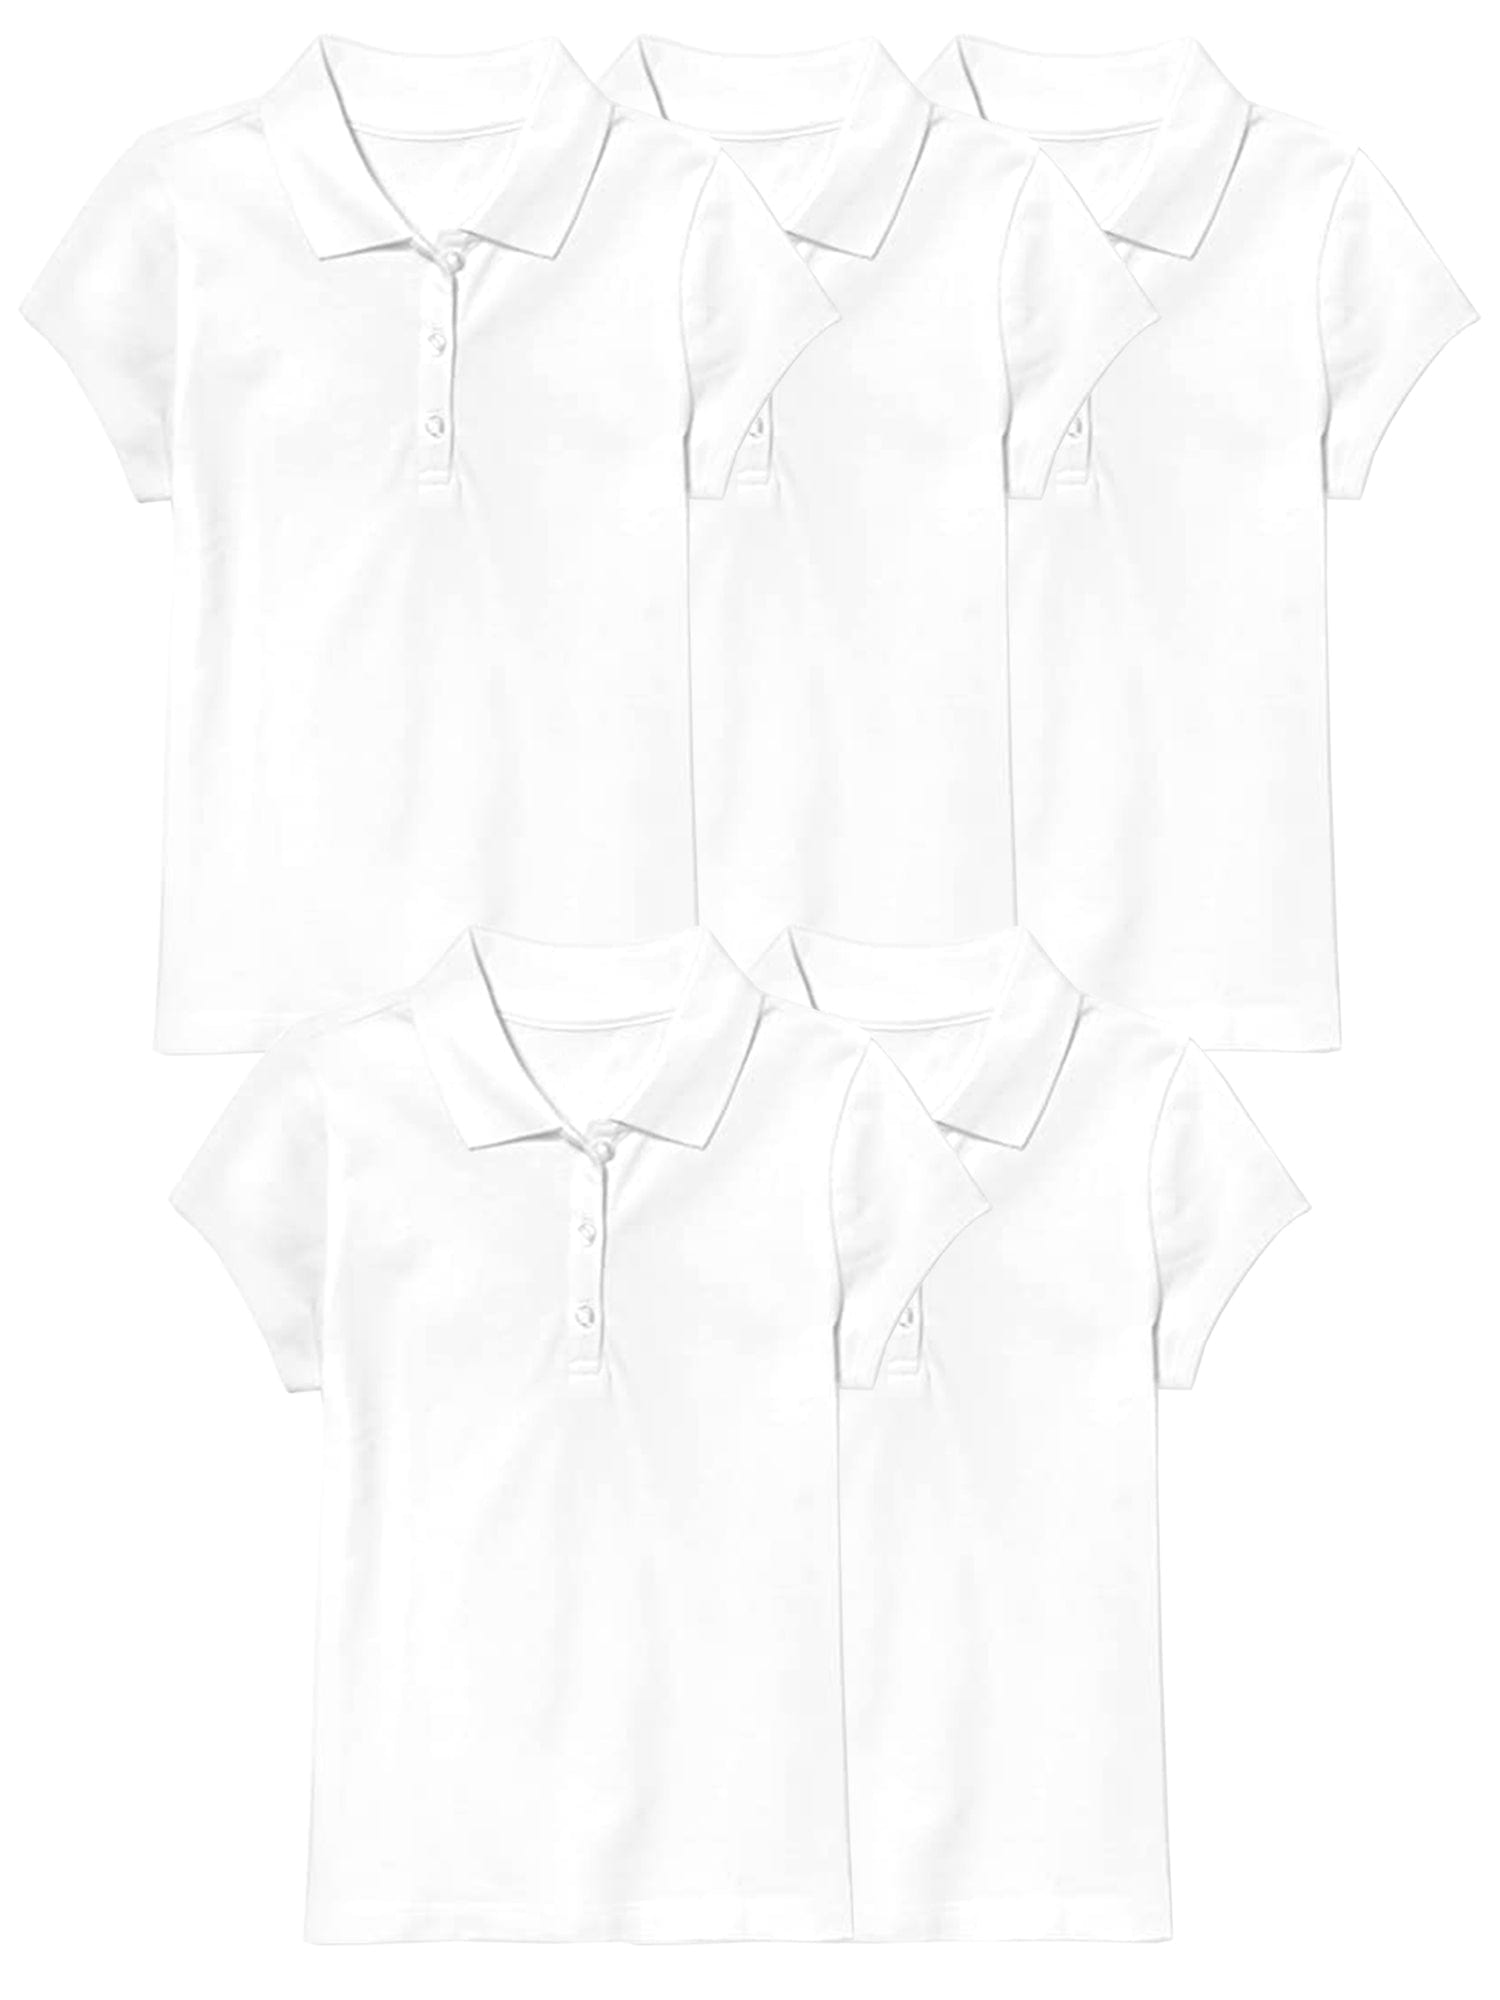 Girl's (5-PACK) Short Sleeve Polo Shirt (Sizes S-2X) - GalaxybyHarvic